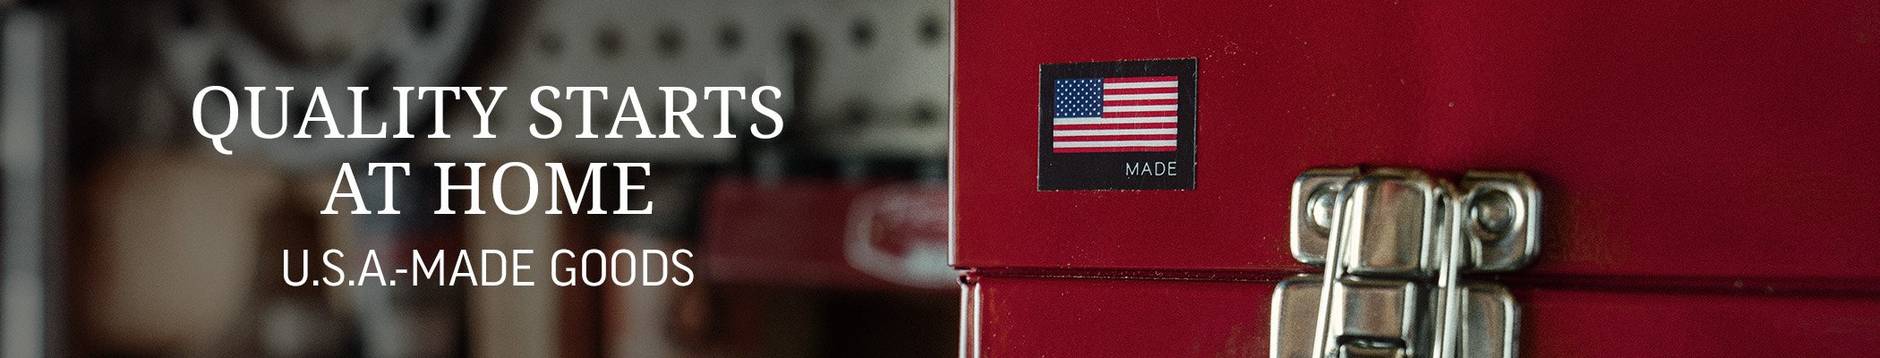 Quality starts at home. USA made goods. A close-up image of a red Best Made steel box with an icon of the American flag above the word made.